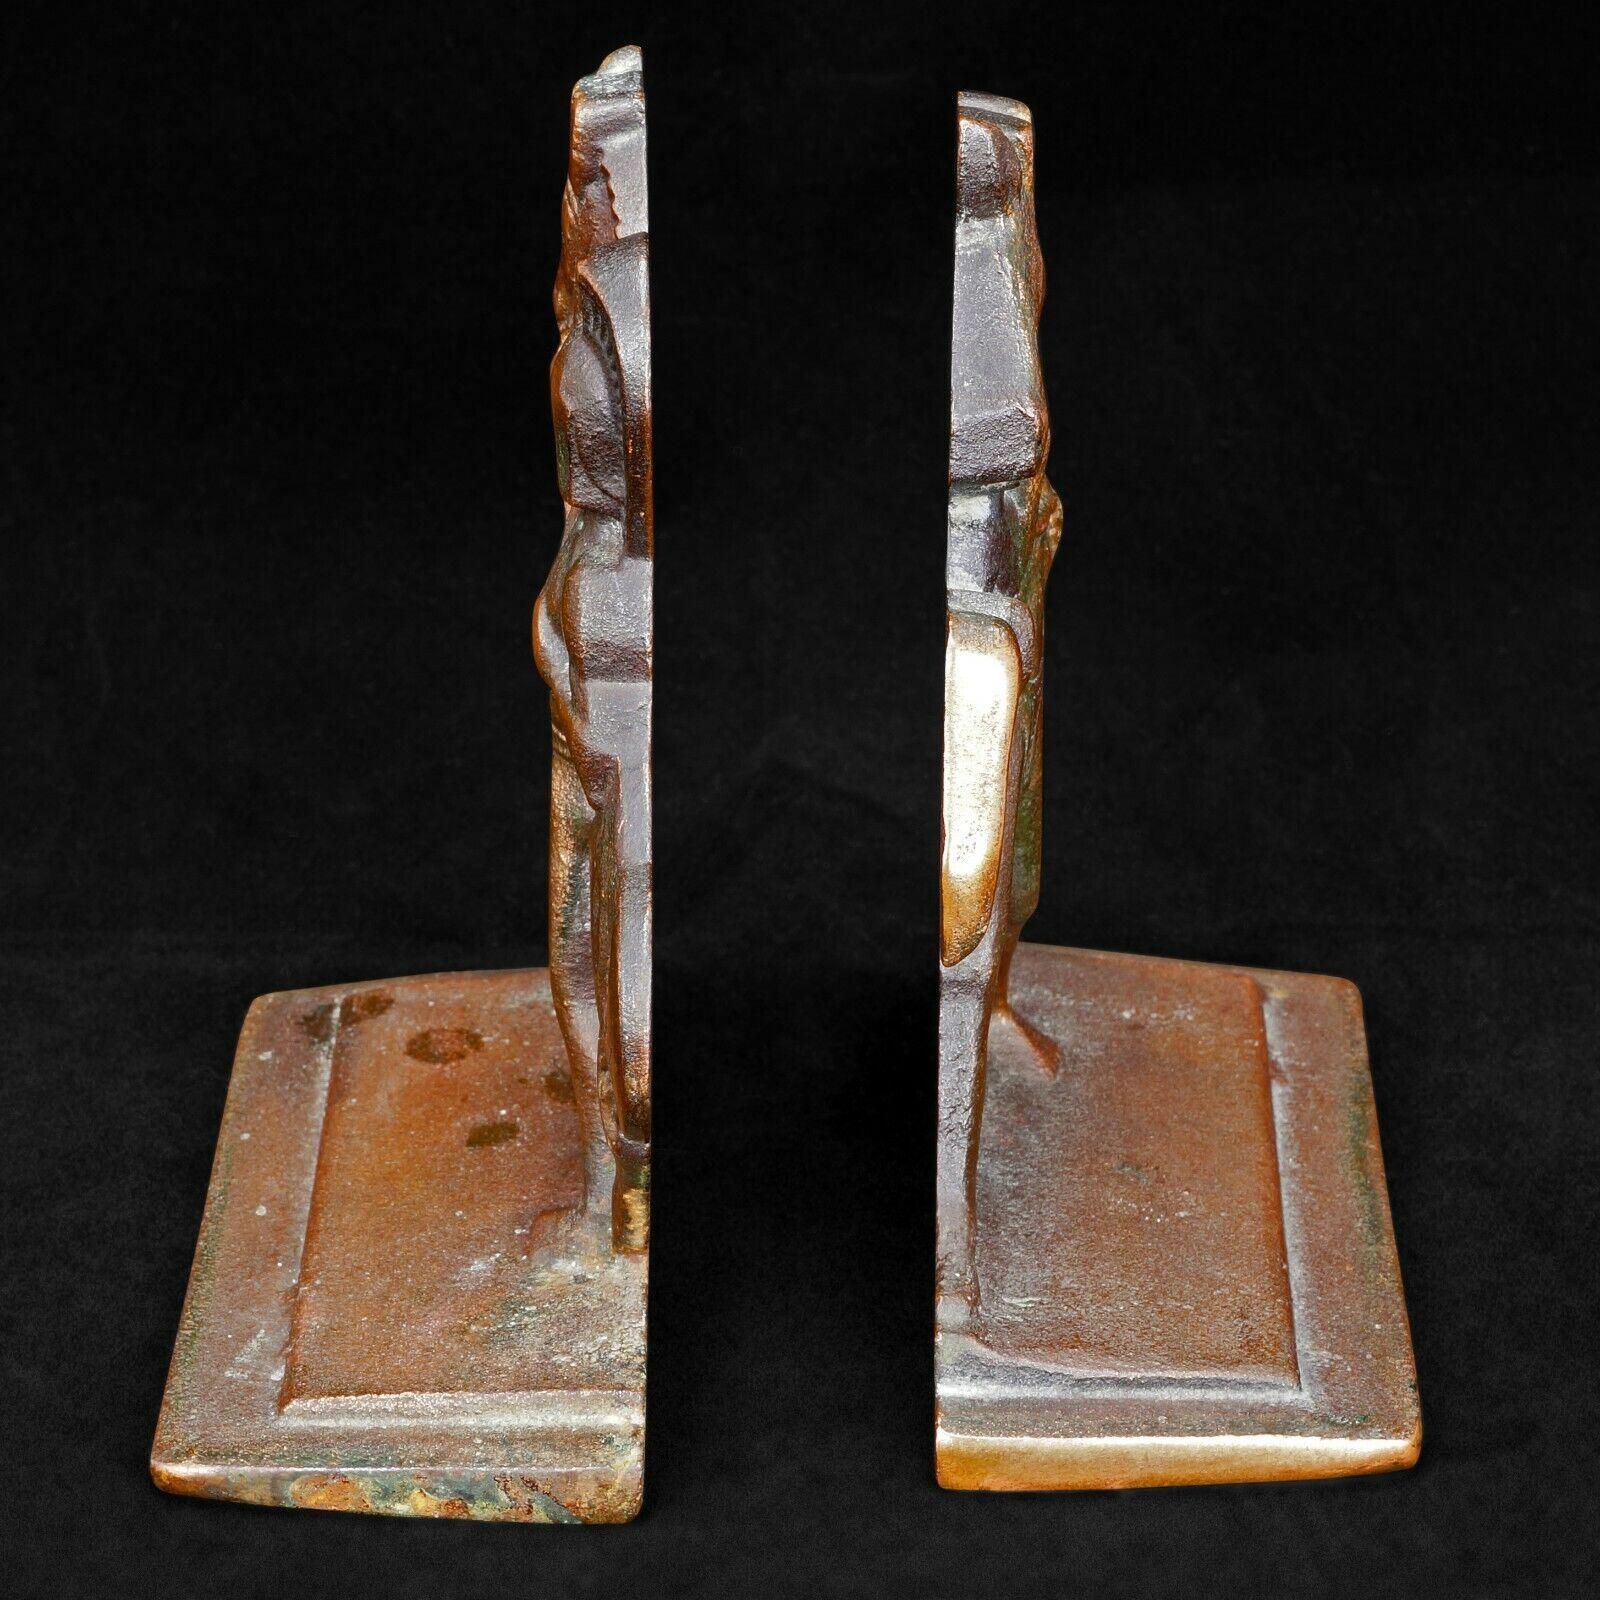 Pair of Bookends of Roman Horseman by Littco Iron circa 1928 - Bear and Raven Antiques